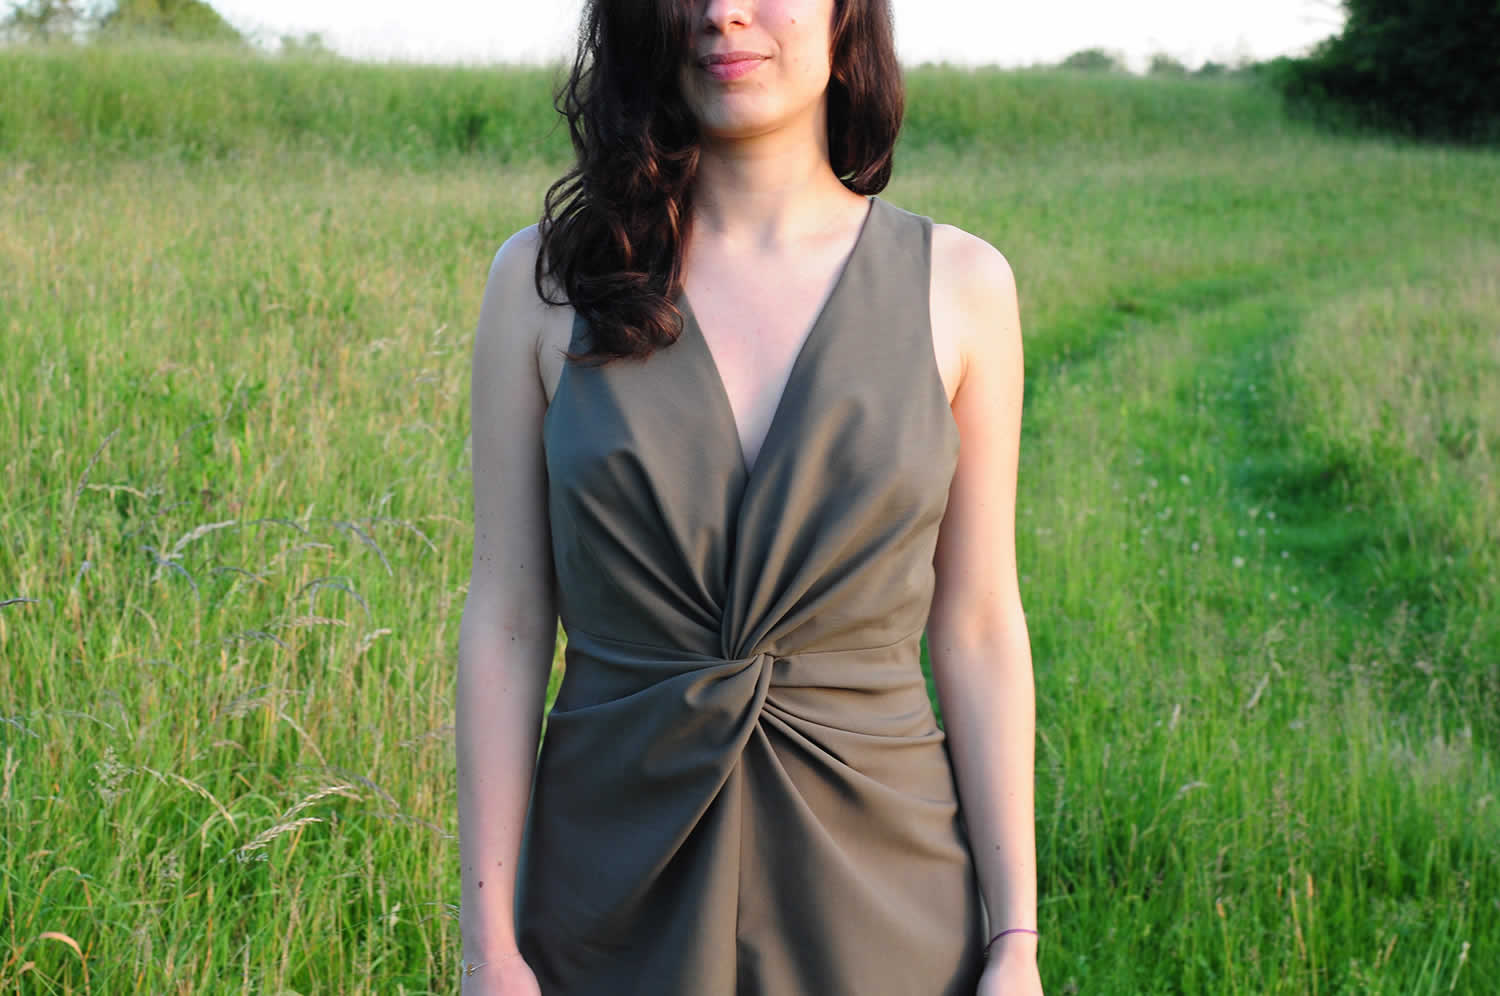 ladulsatina Sewing and DIY fashion blog: leather jacket and playsuit - army green playsuit with central draping - detail